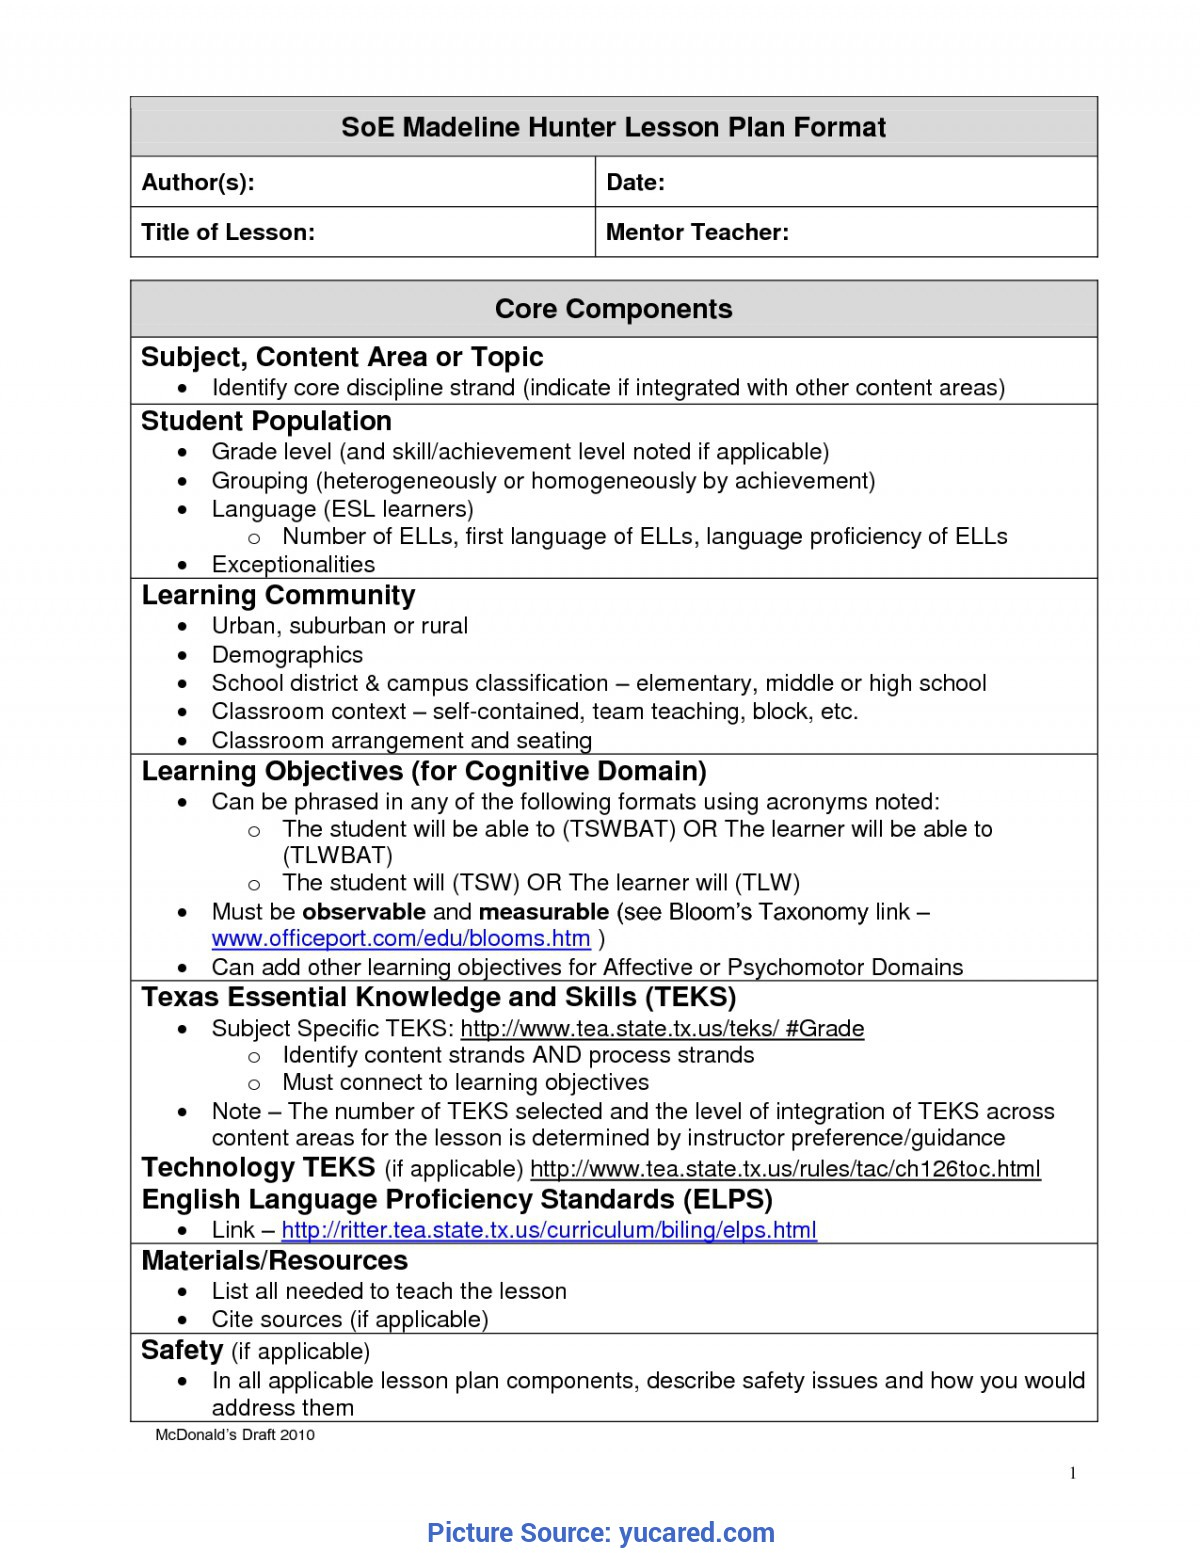 Simple Madeline Hunter Lesson Plan Blank Template Madeline Intended For Madeline Hunter Lesson Plan Blank Template